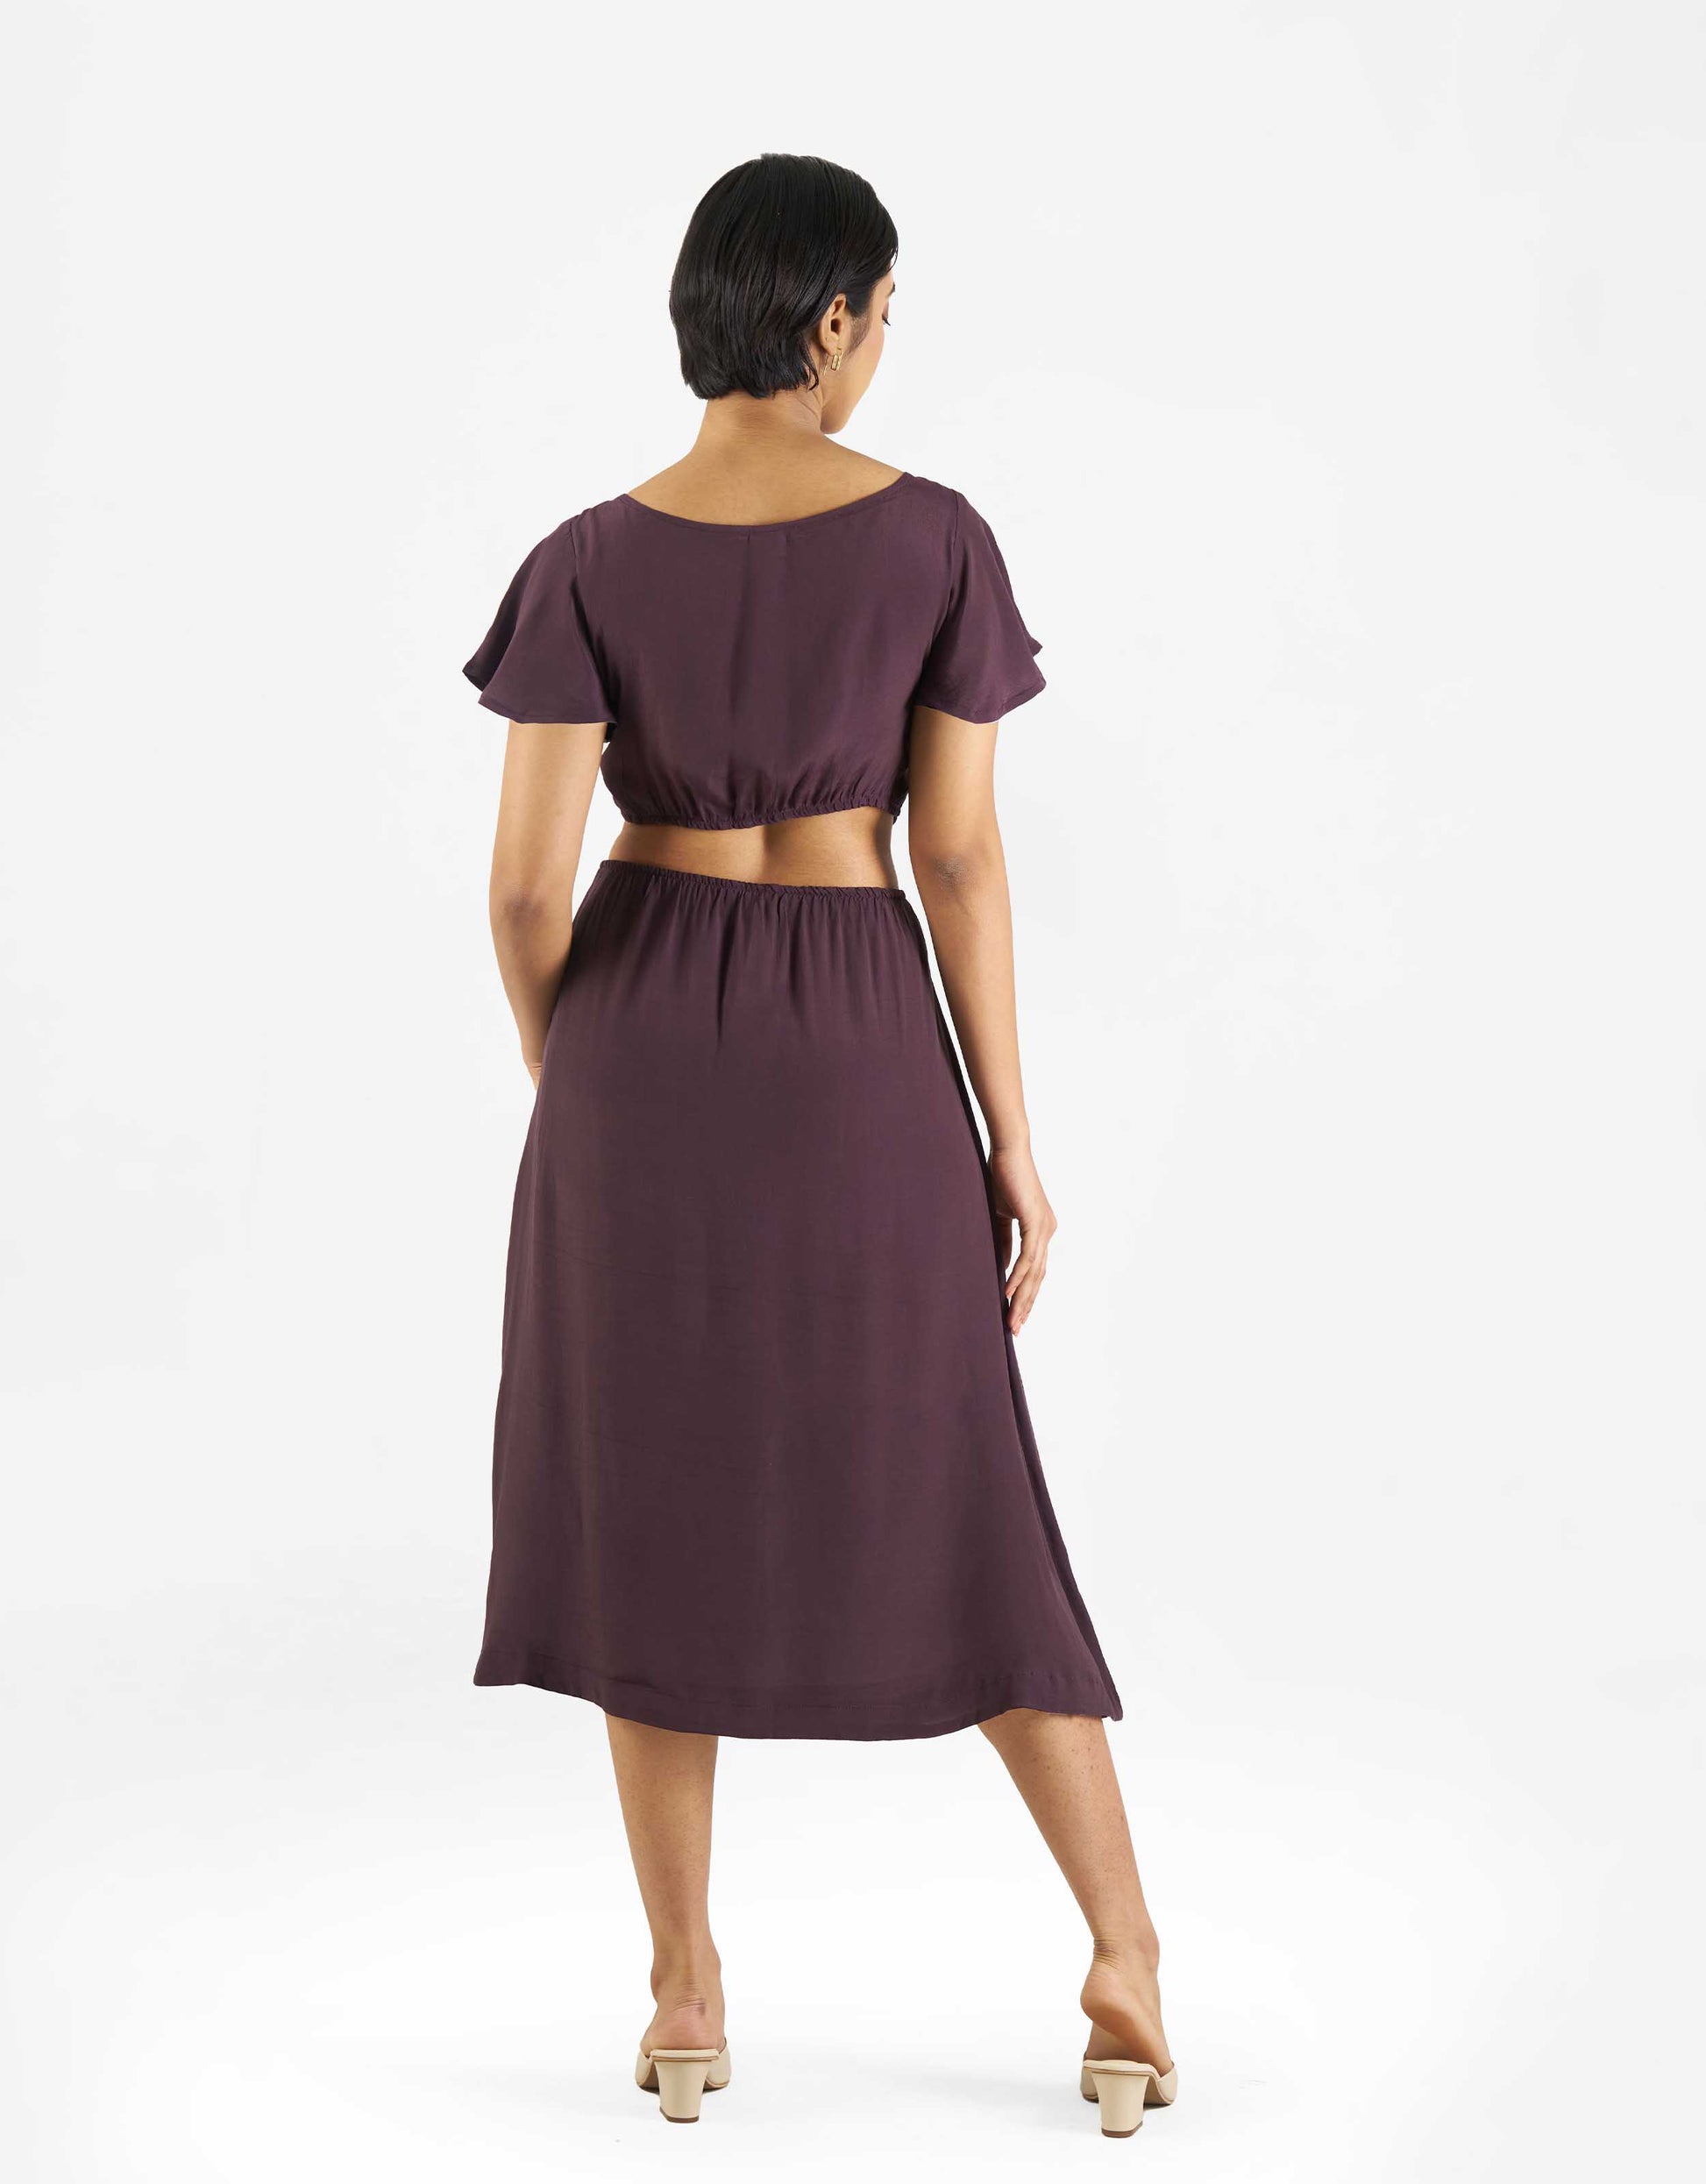 Back view of Hueloom's Reversible Cut-out dress in purple.